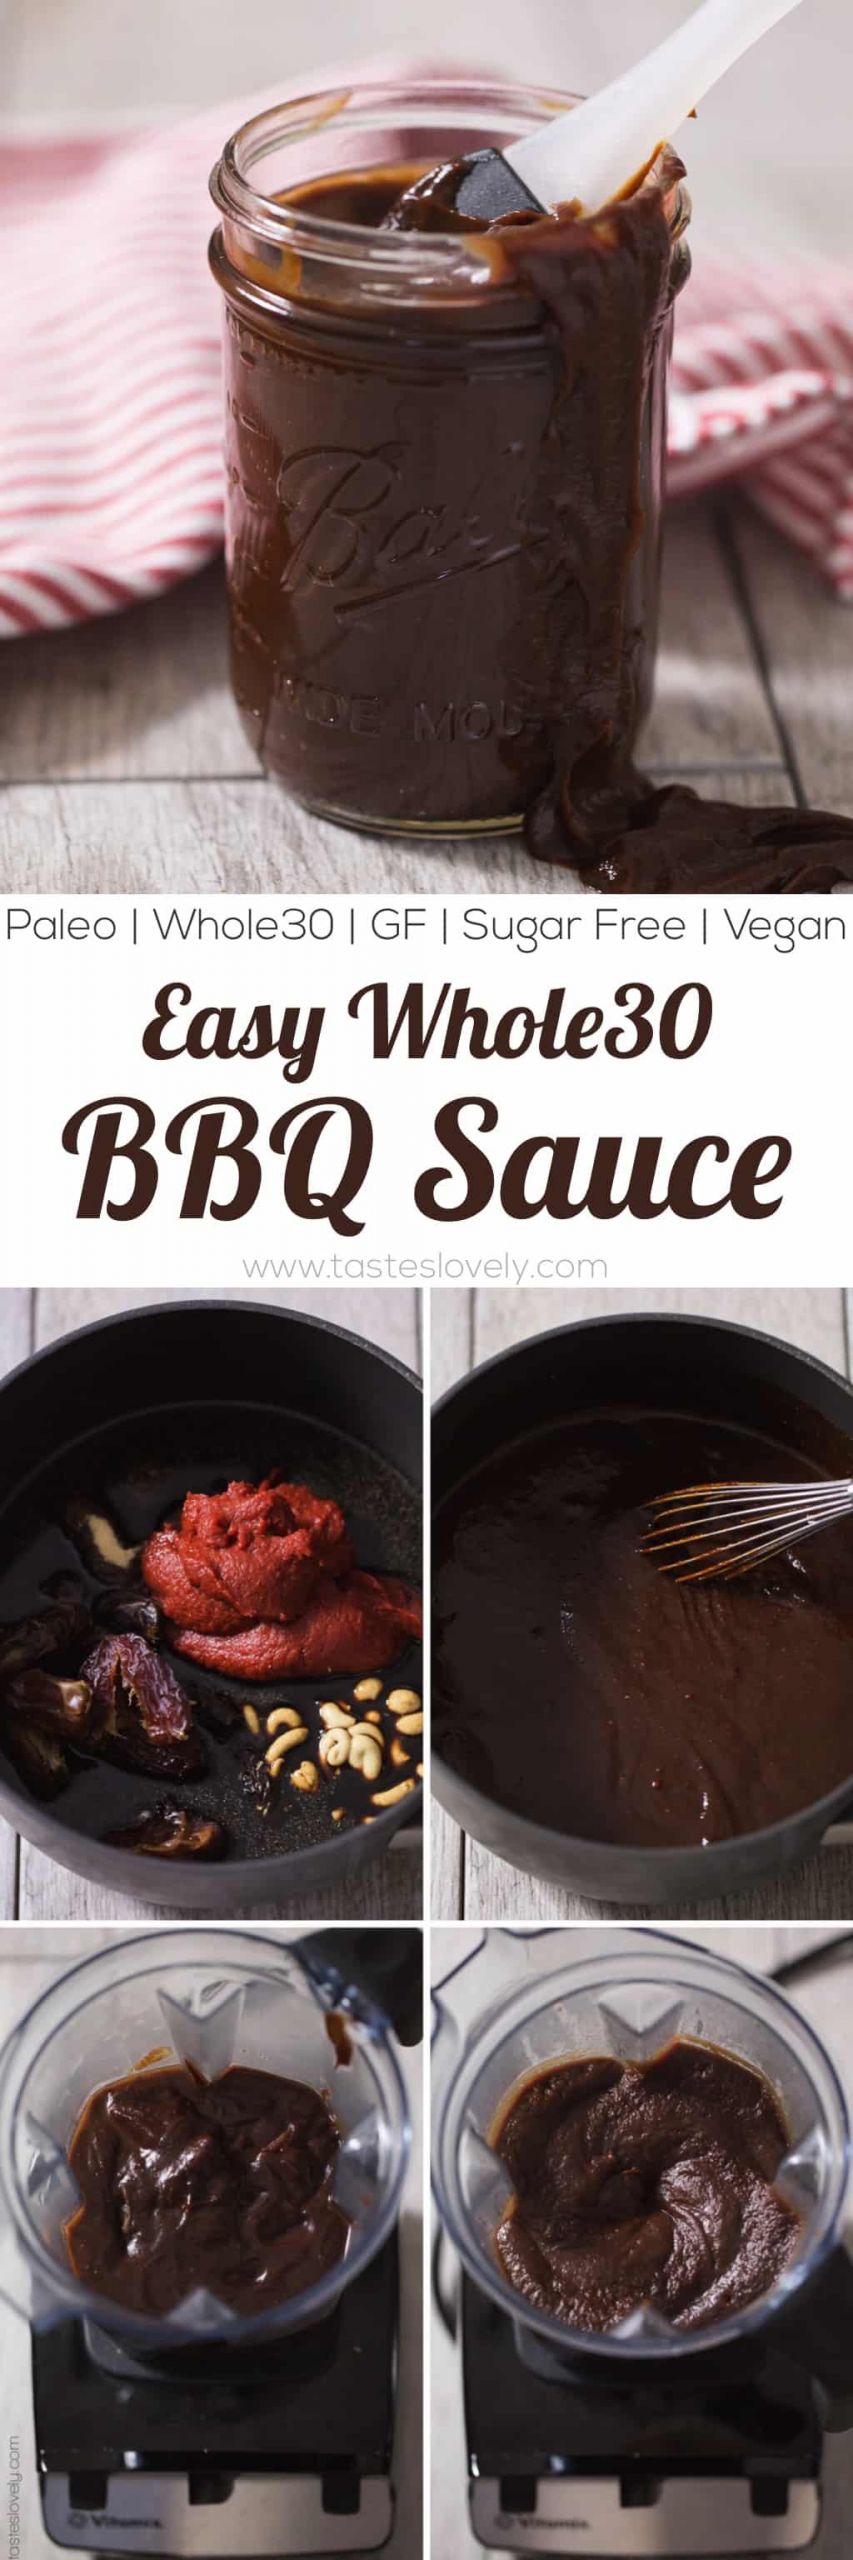 Whole 30 Sauces
 Easy Whole30 BBQ Sauce Tessemae s Copycat Tastes Lovely